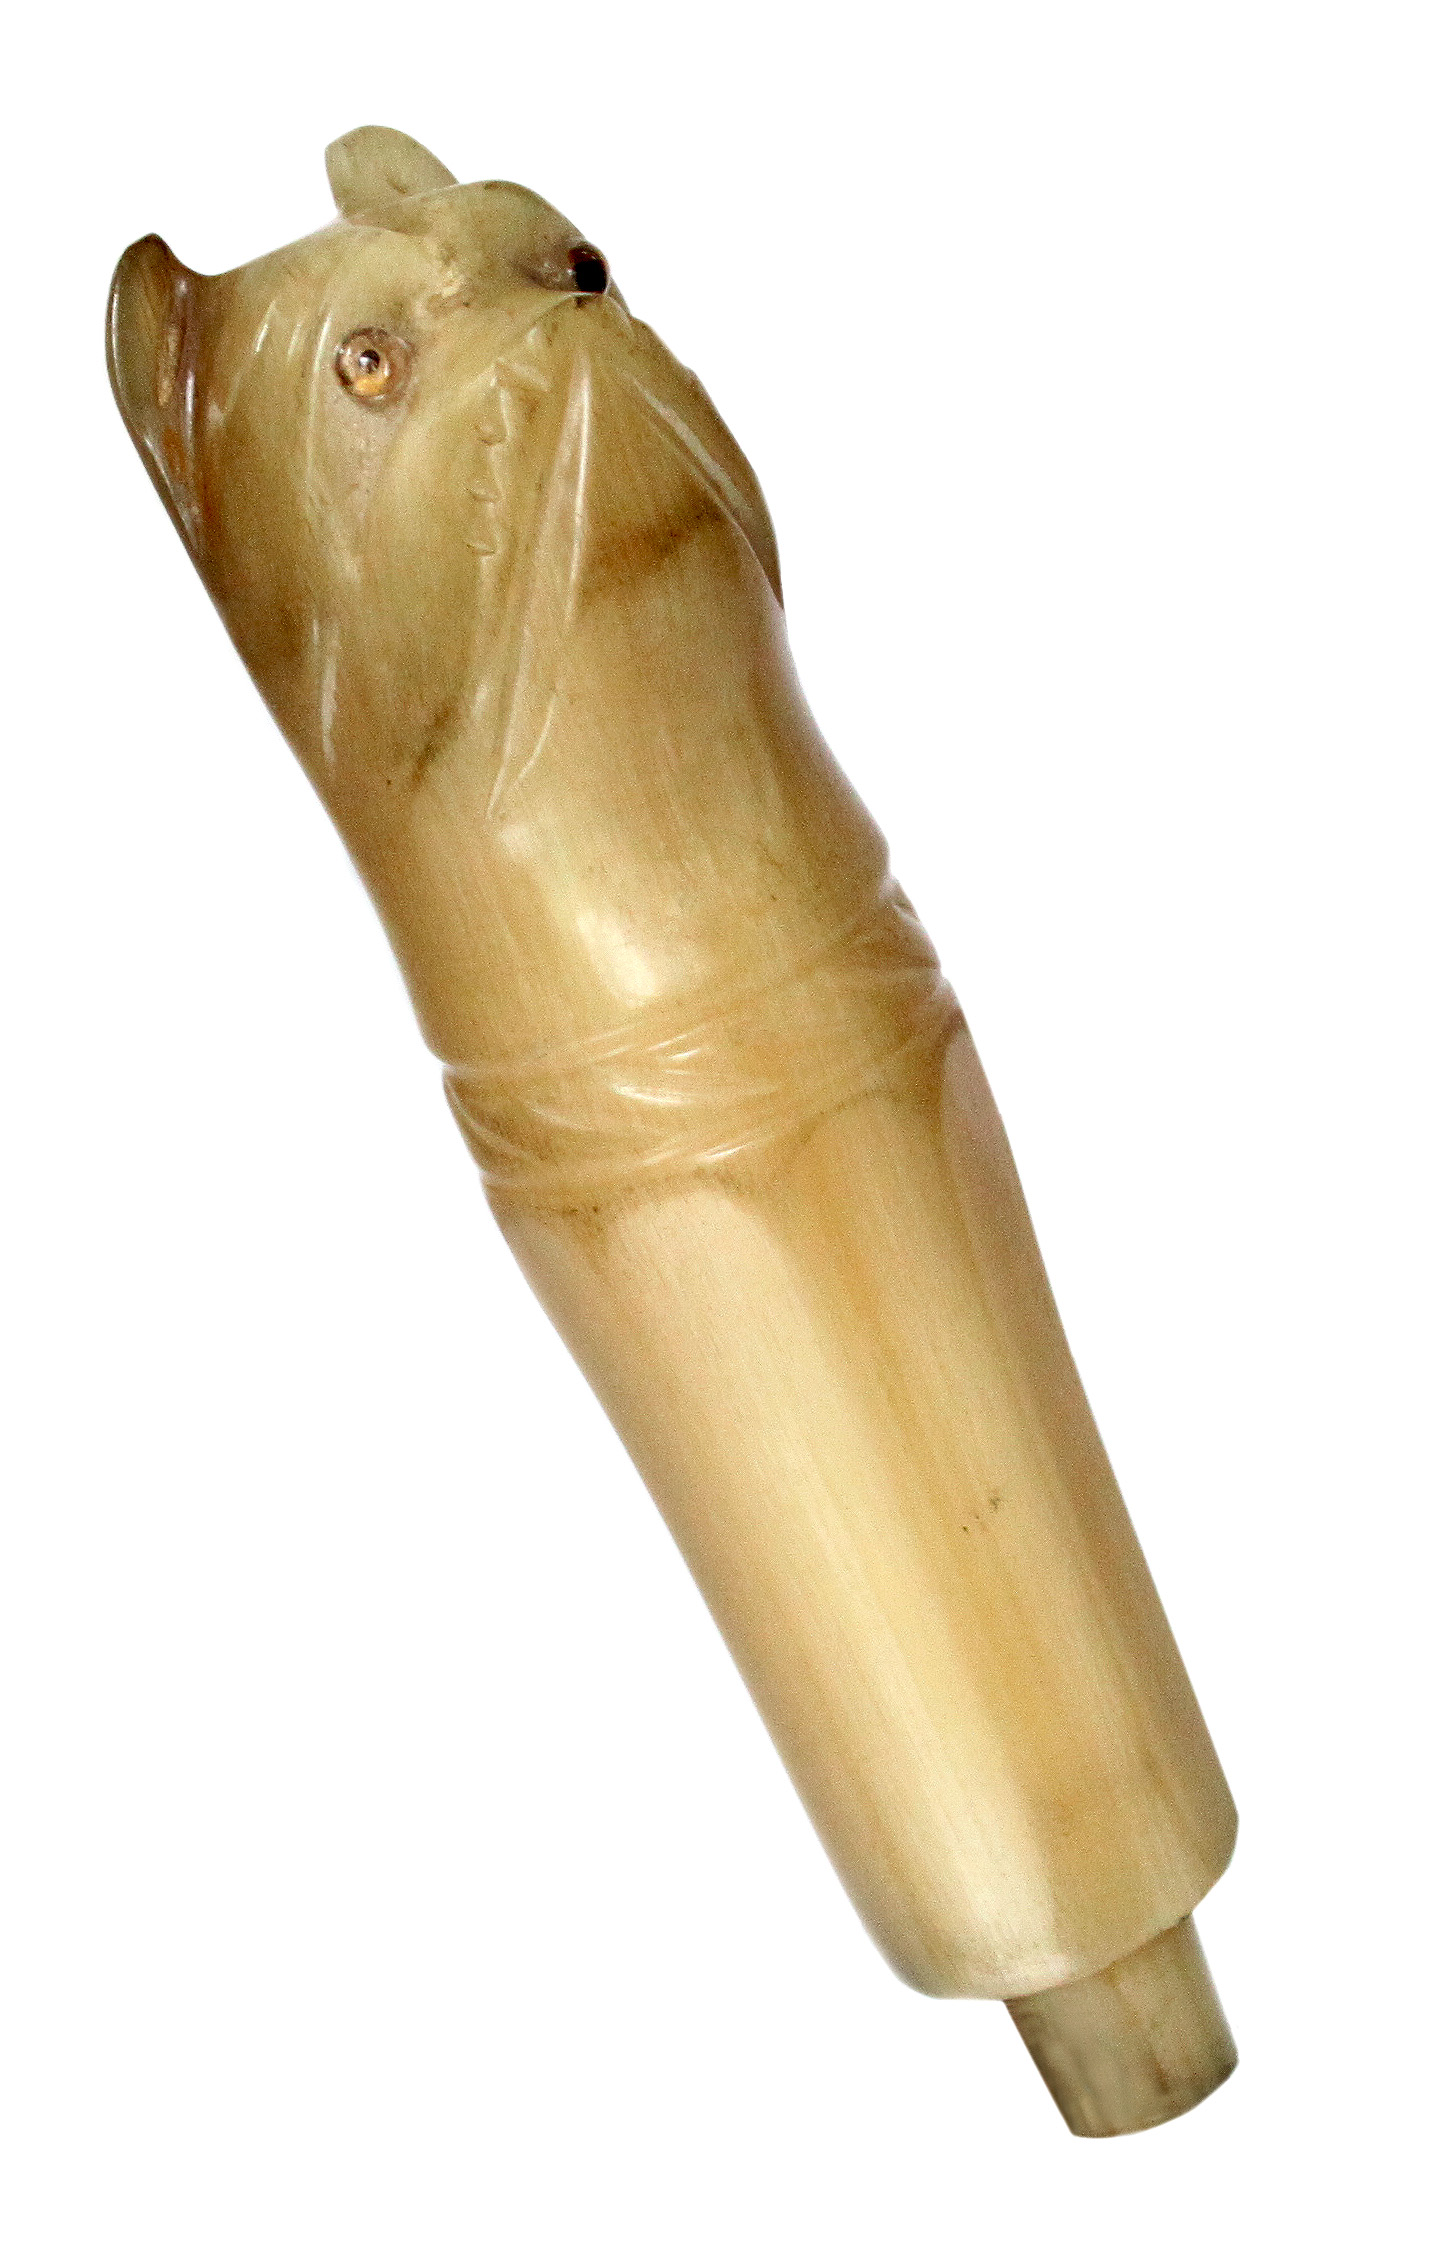 Click to see full size: Art Deco celluloid cane handle depicting a West Highland Terrier head